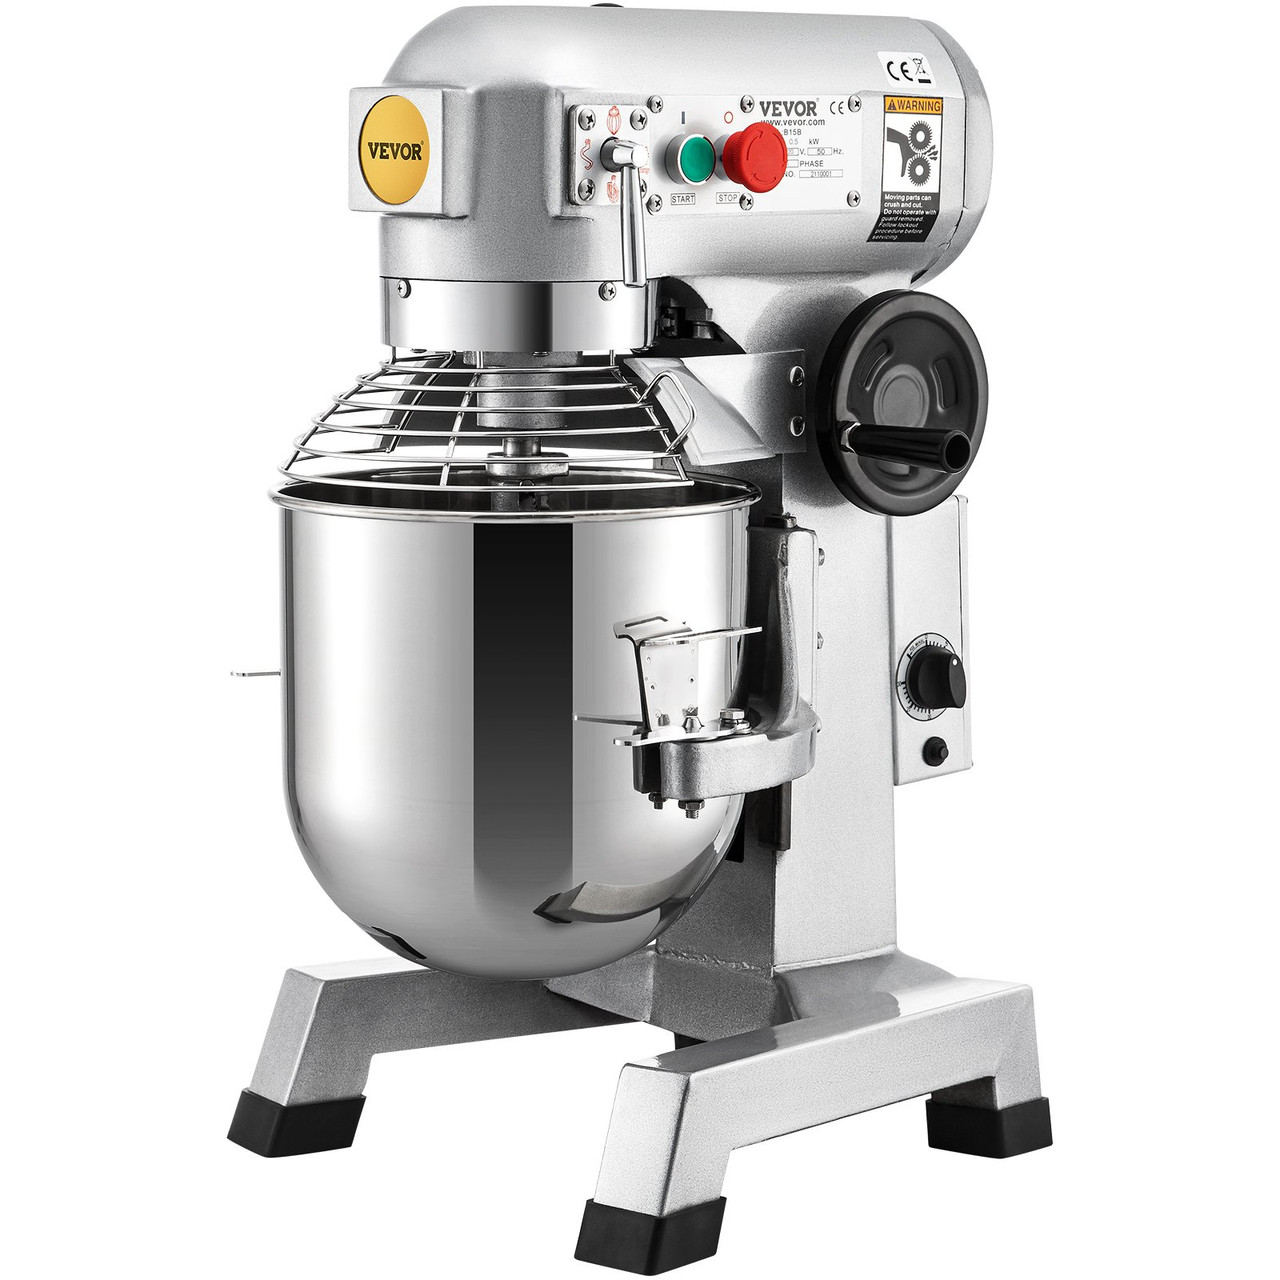 VEVOR Commercial Food Mixer, 10Qt Commercial Mixer with Timing Function, 450W Stainless Steel Bowl Heavy Duty Electric Food Mixer Commercial with 3 Speeds Adjustable 113/184/341 RPM, Dough Hook Whisk Beater Included, Perfect for Bakery Pizzeria